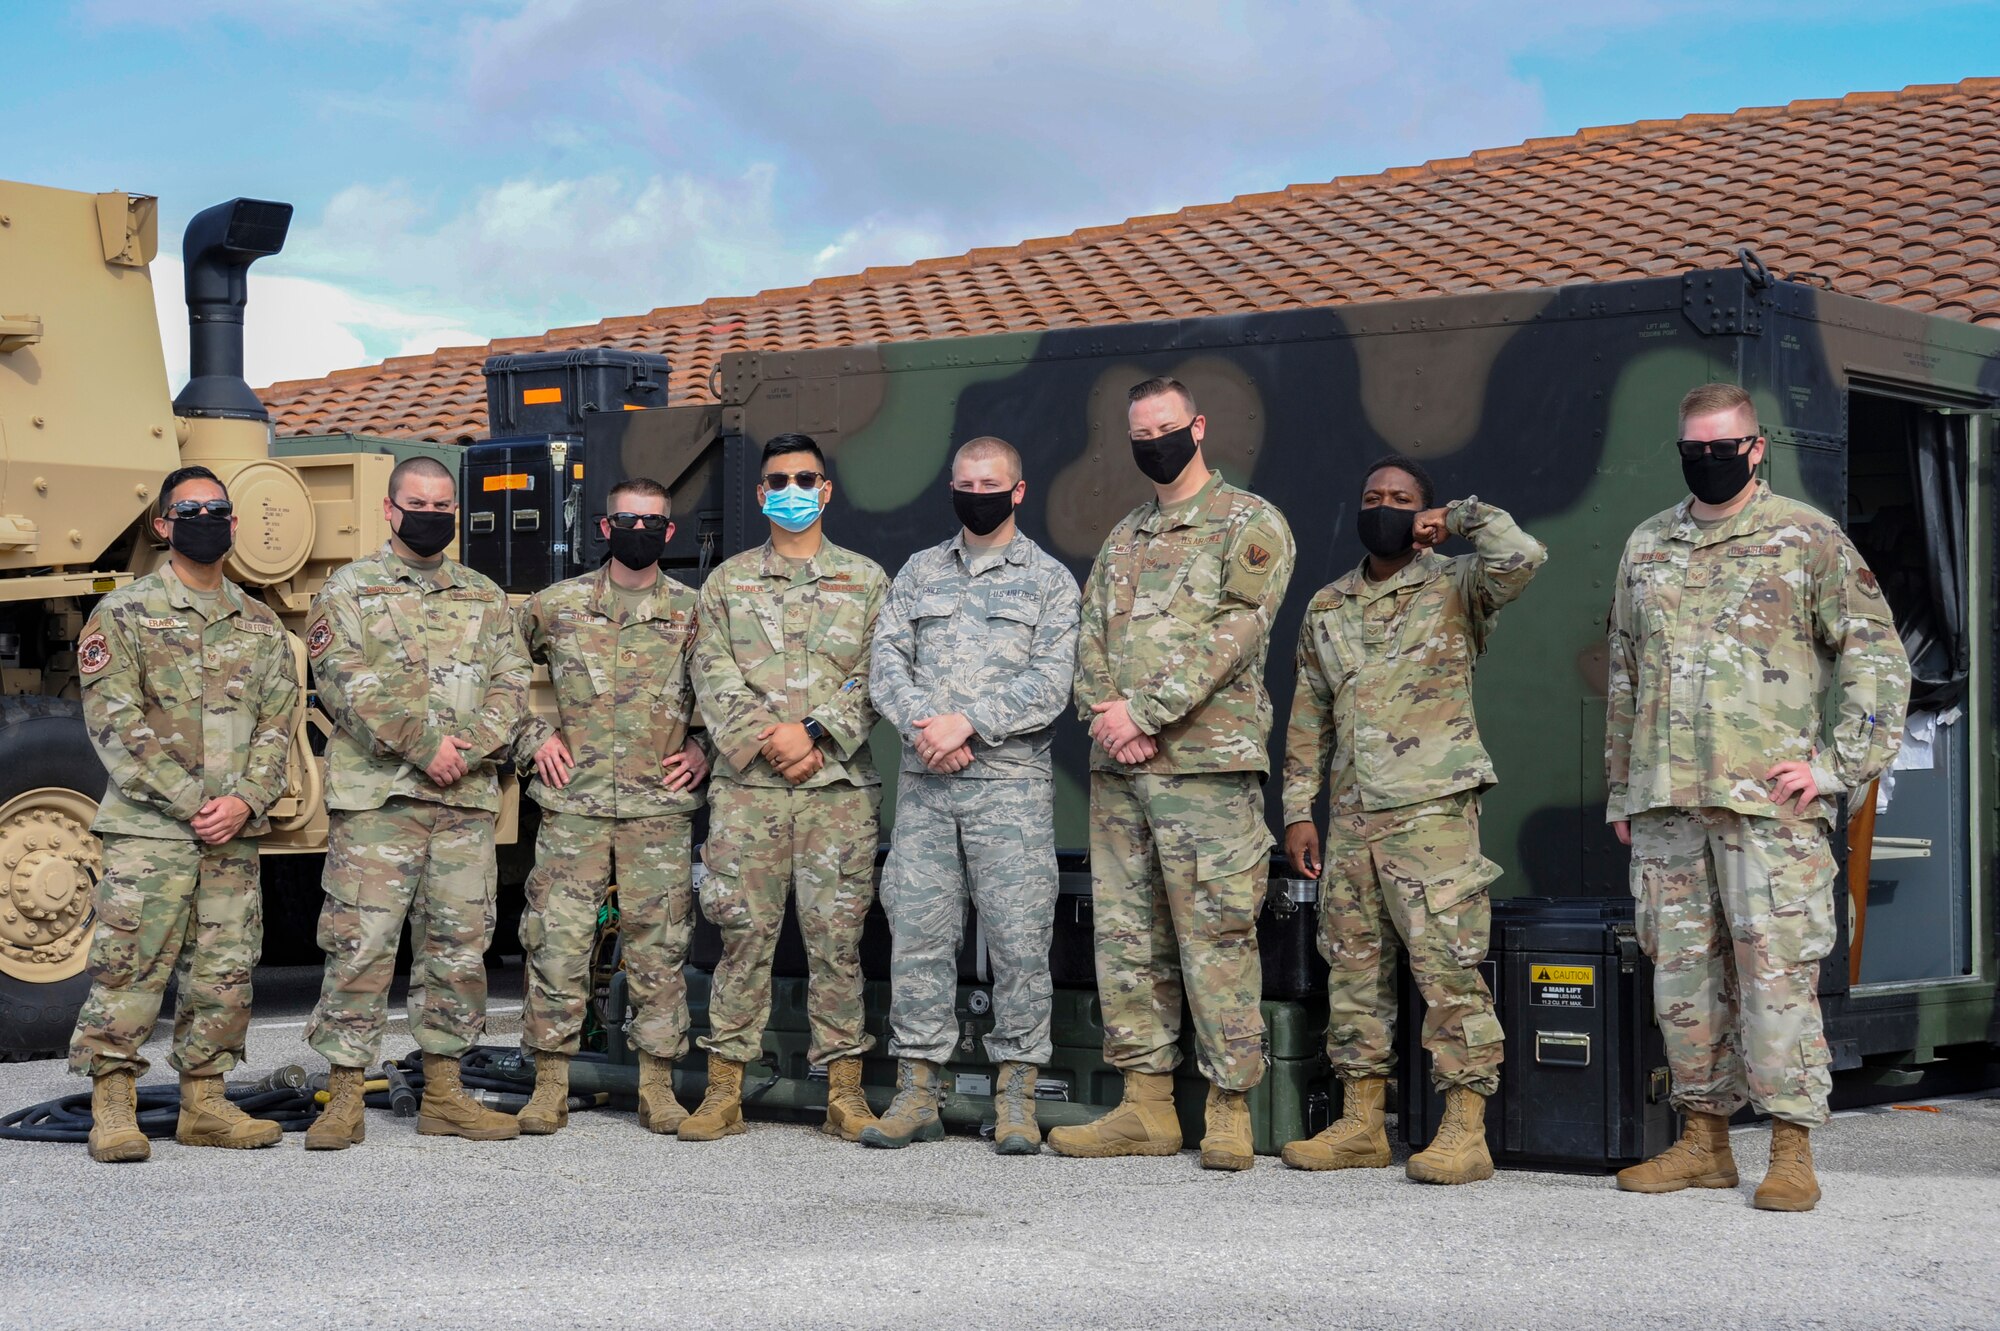 Airmen from the 729th Air Control Squadron pose for a photo at Patrick Air Force Base, Fla., Nov. 16, 2020. The 729th ACS provided air tracking support for the Falcon 9 Crew-1 launch on Nov. 15, 2020. (U.S. Space Force Photo by 2nd Lt. Christian Little)